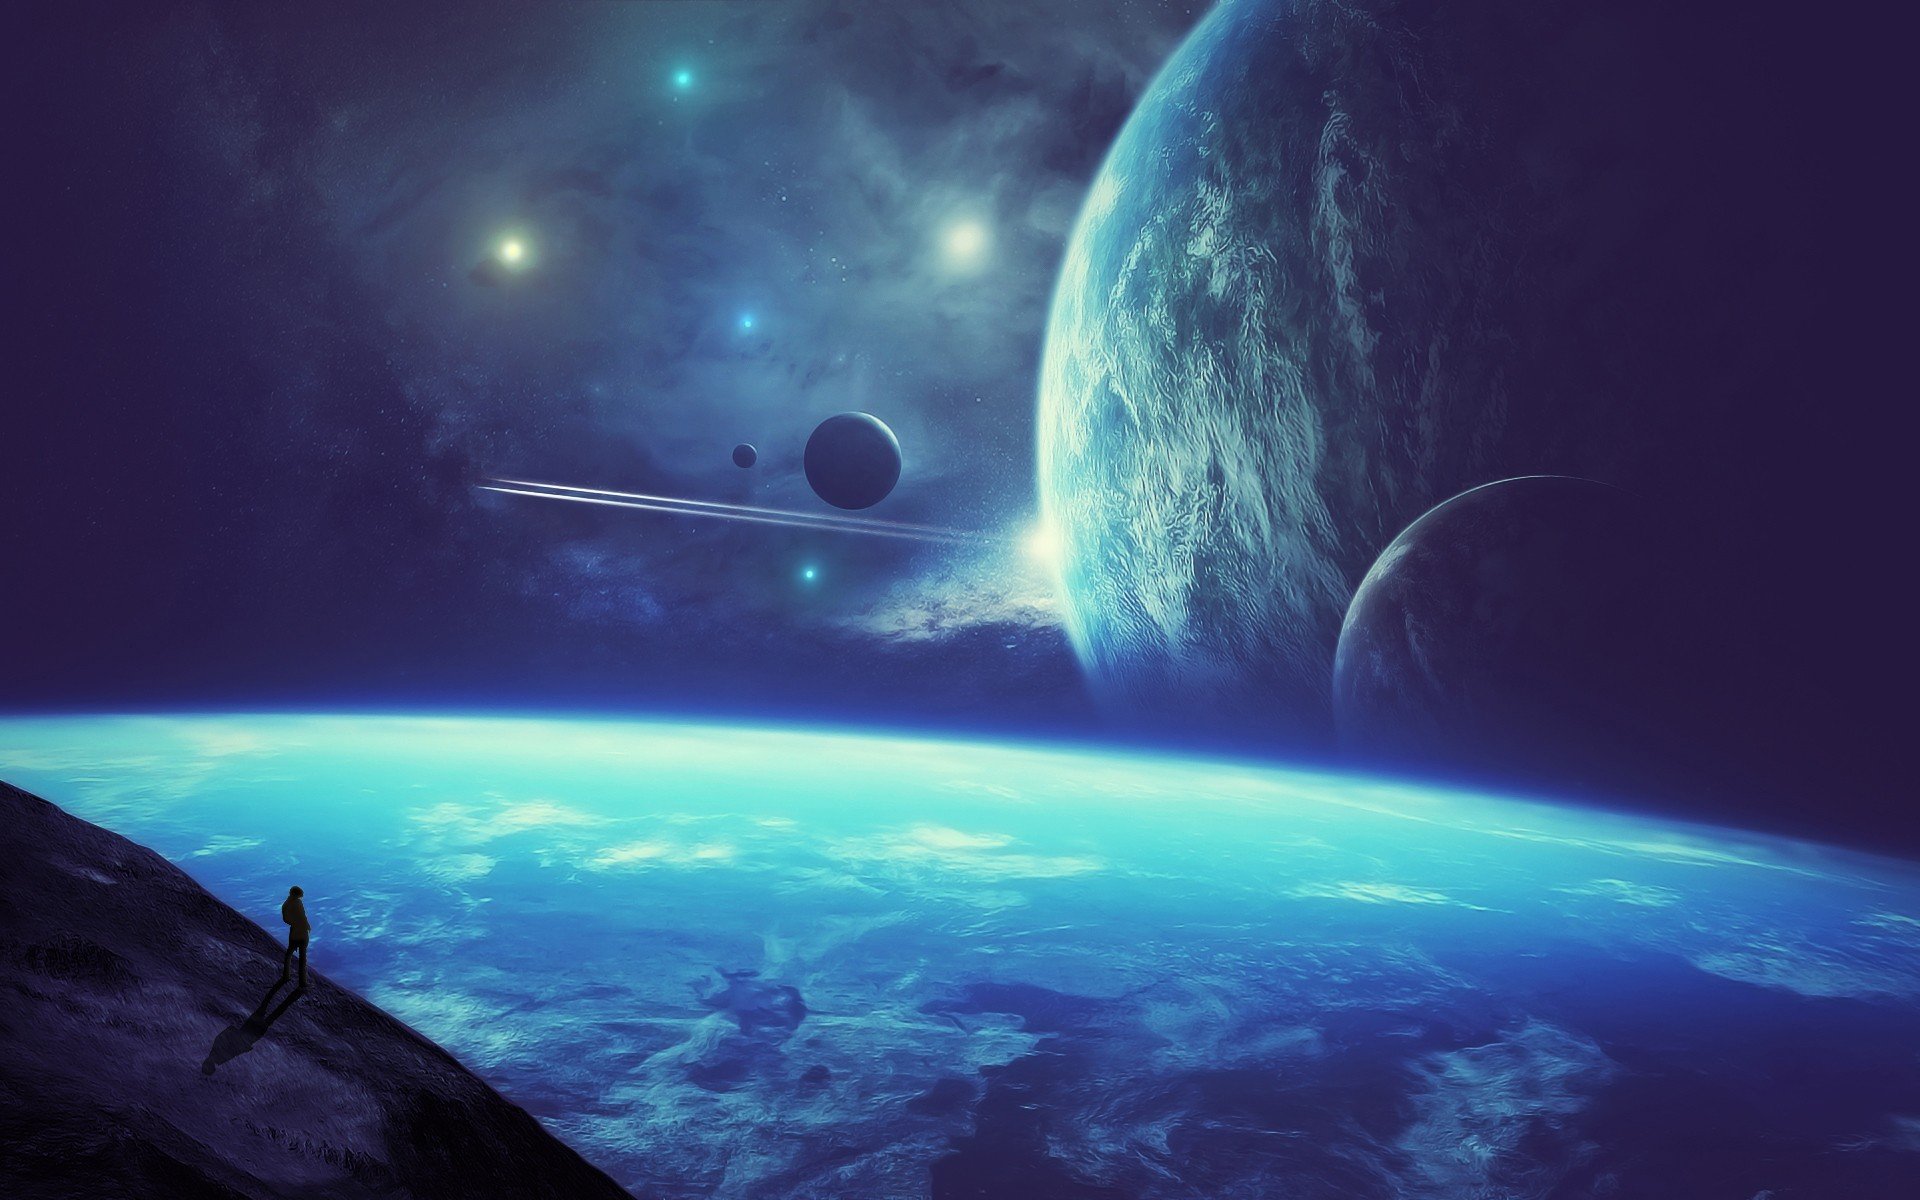 Wallpaper Atmosphere Earth Outer Space Space Atmosphere of Earth  Background  Download Free Image